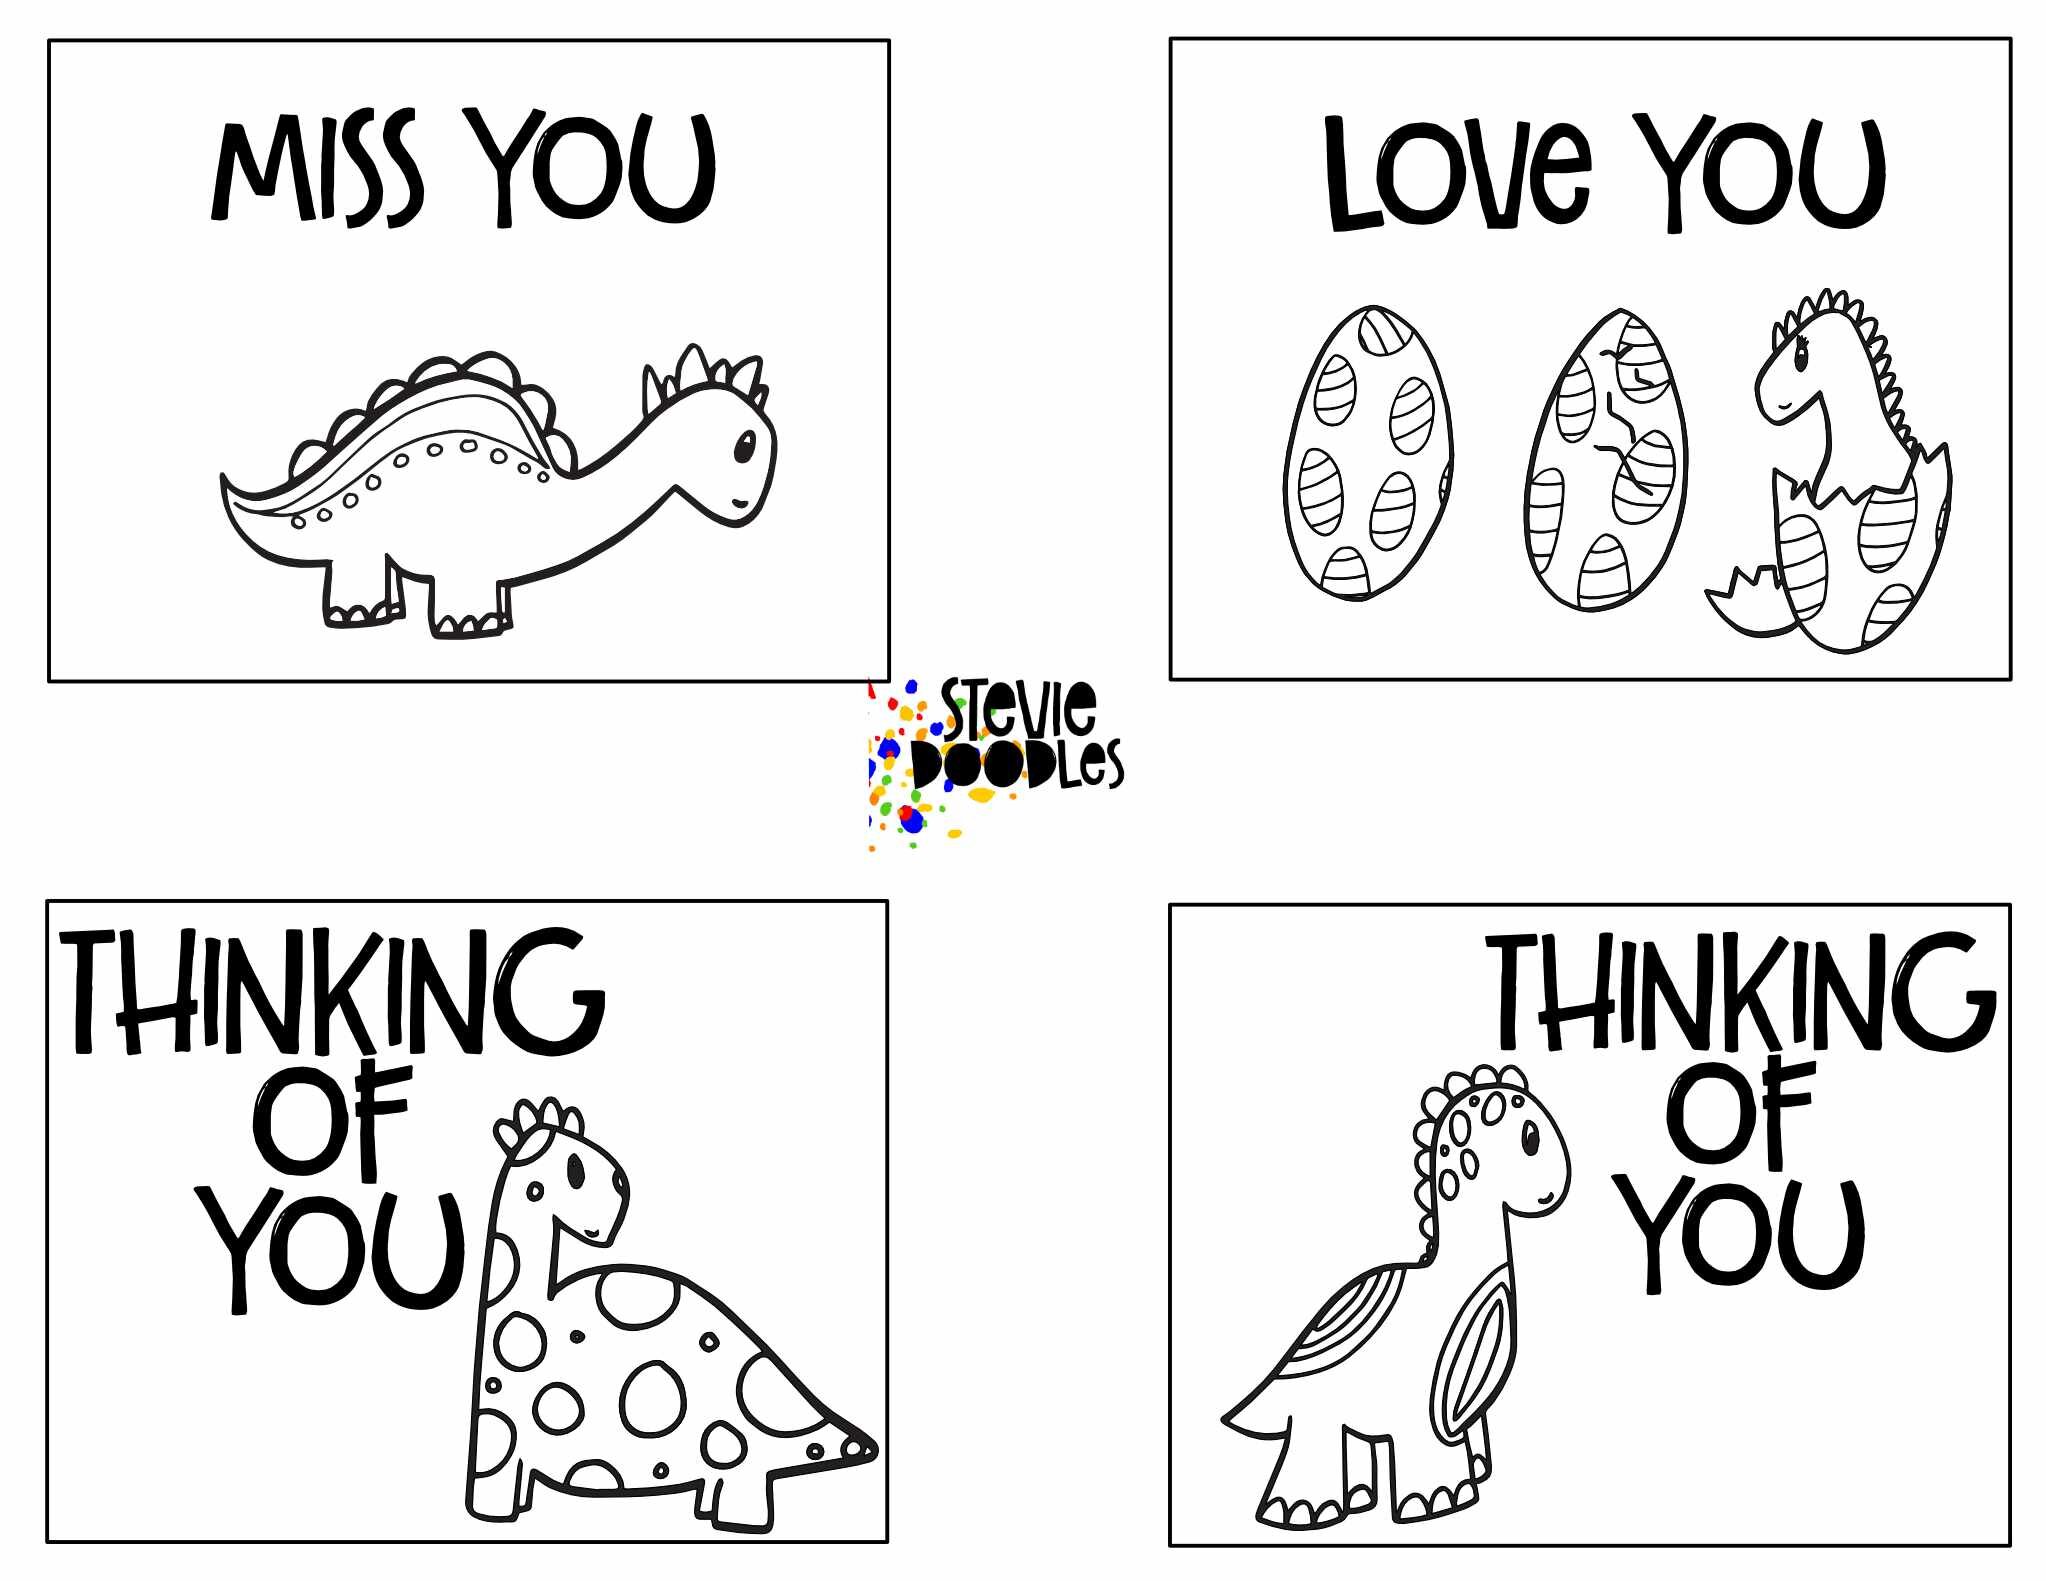 Free Thinking Of You Coloring Cards 28 Cards 7 Pages Printable Colorable Stevie Doodles